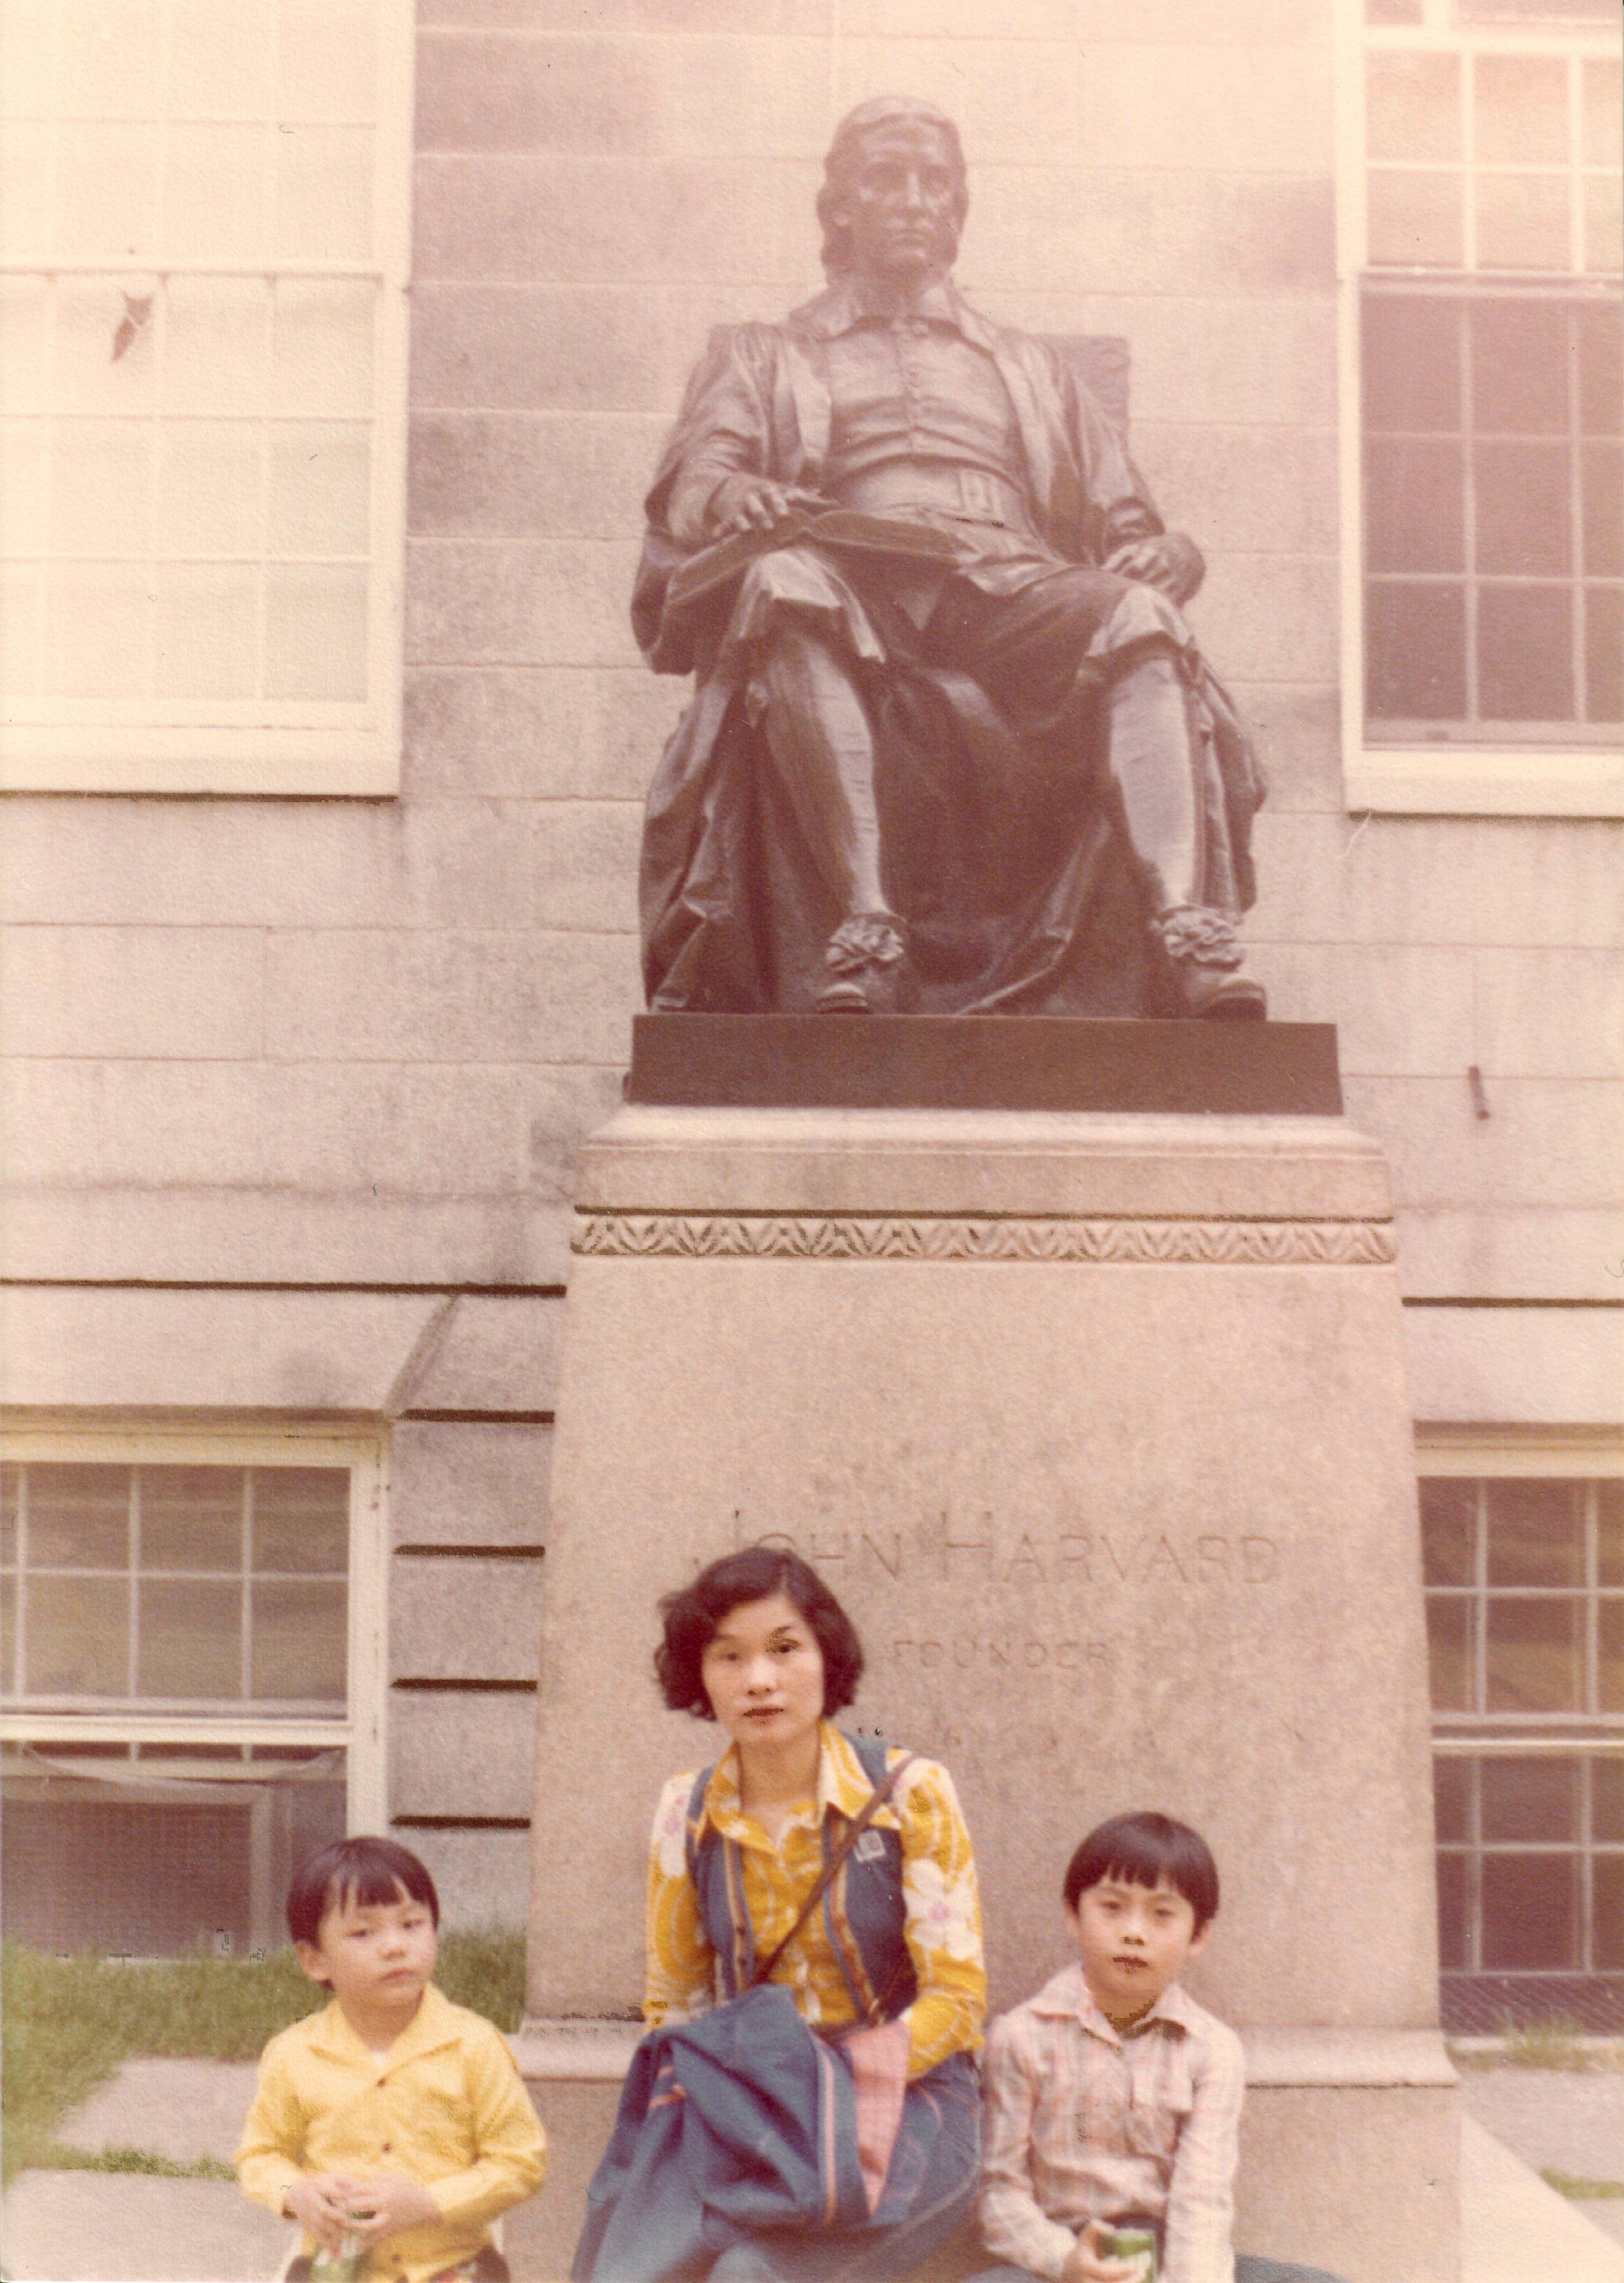 Edwin Lin '97 with his mother, Shu-Nuan Lin, and his brother, Alfred '94, in front of the John Harvard statue